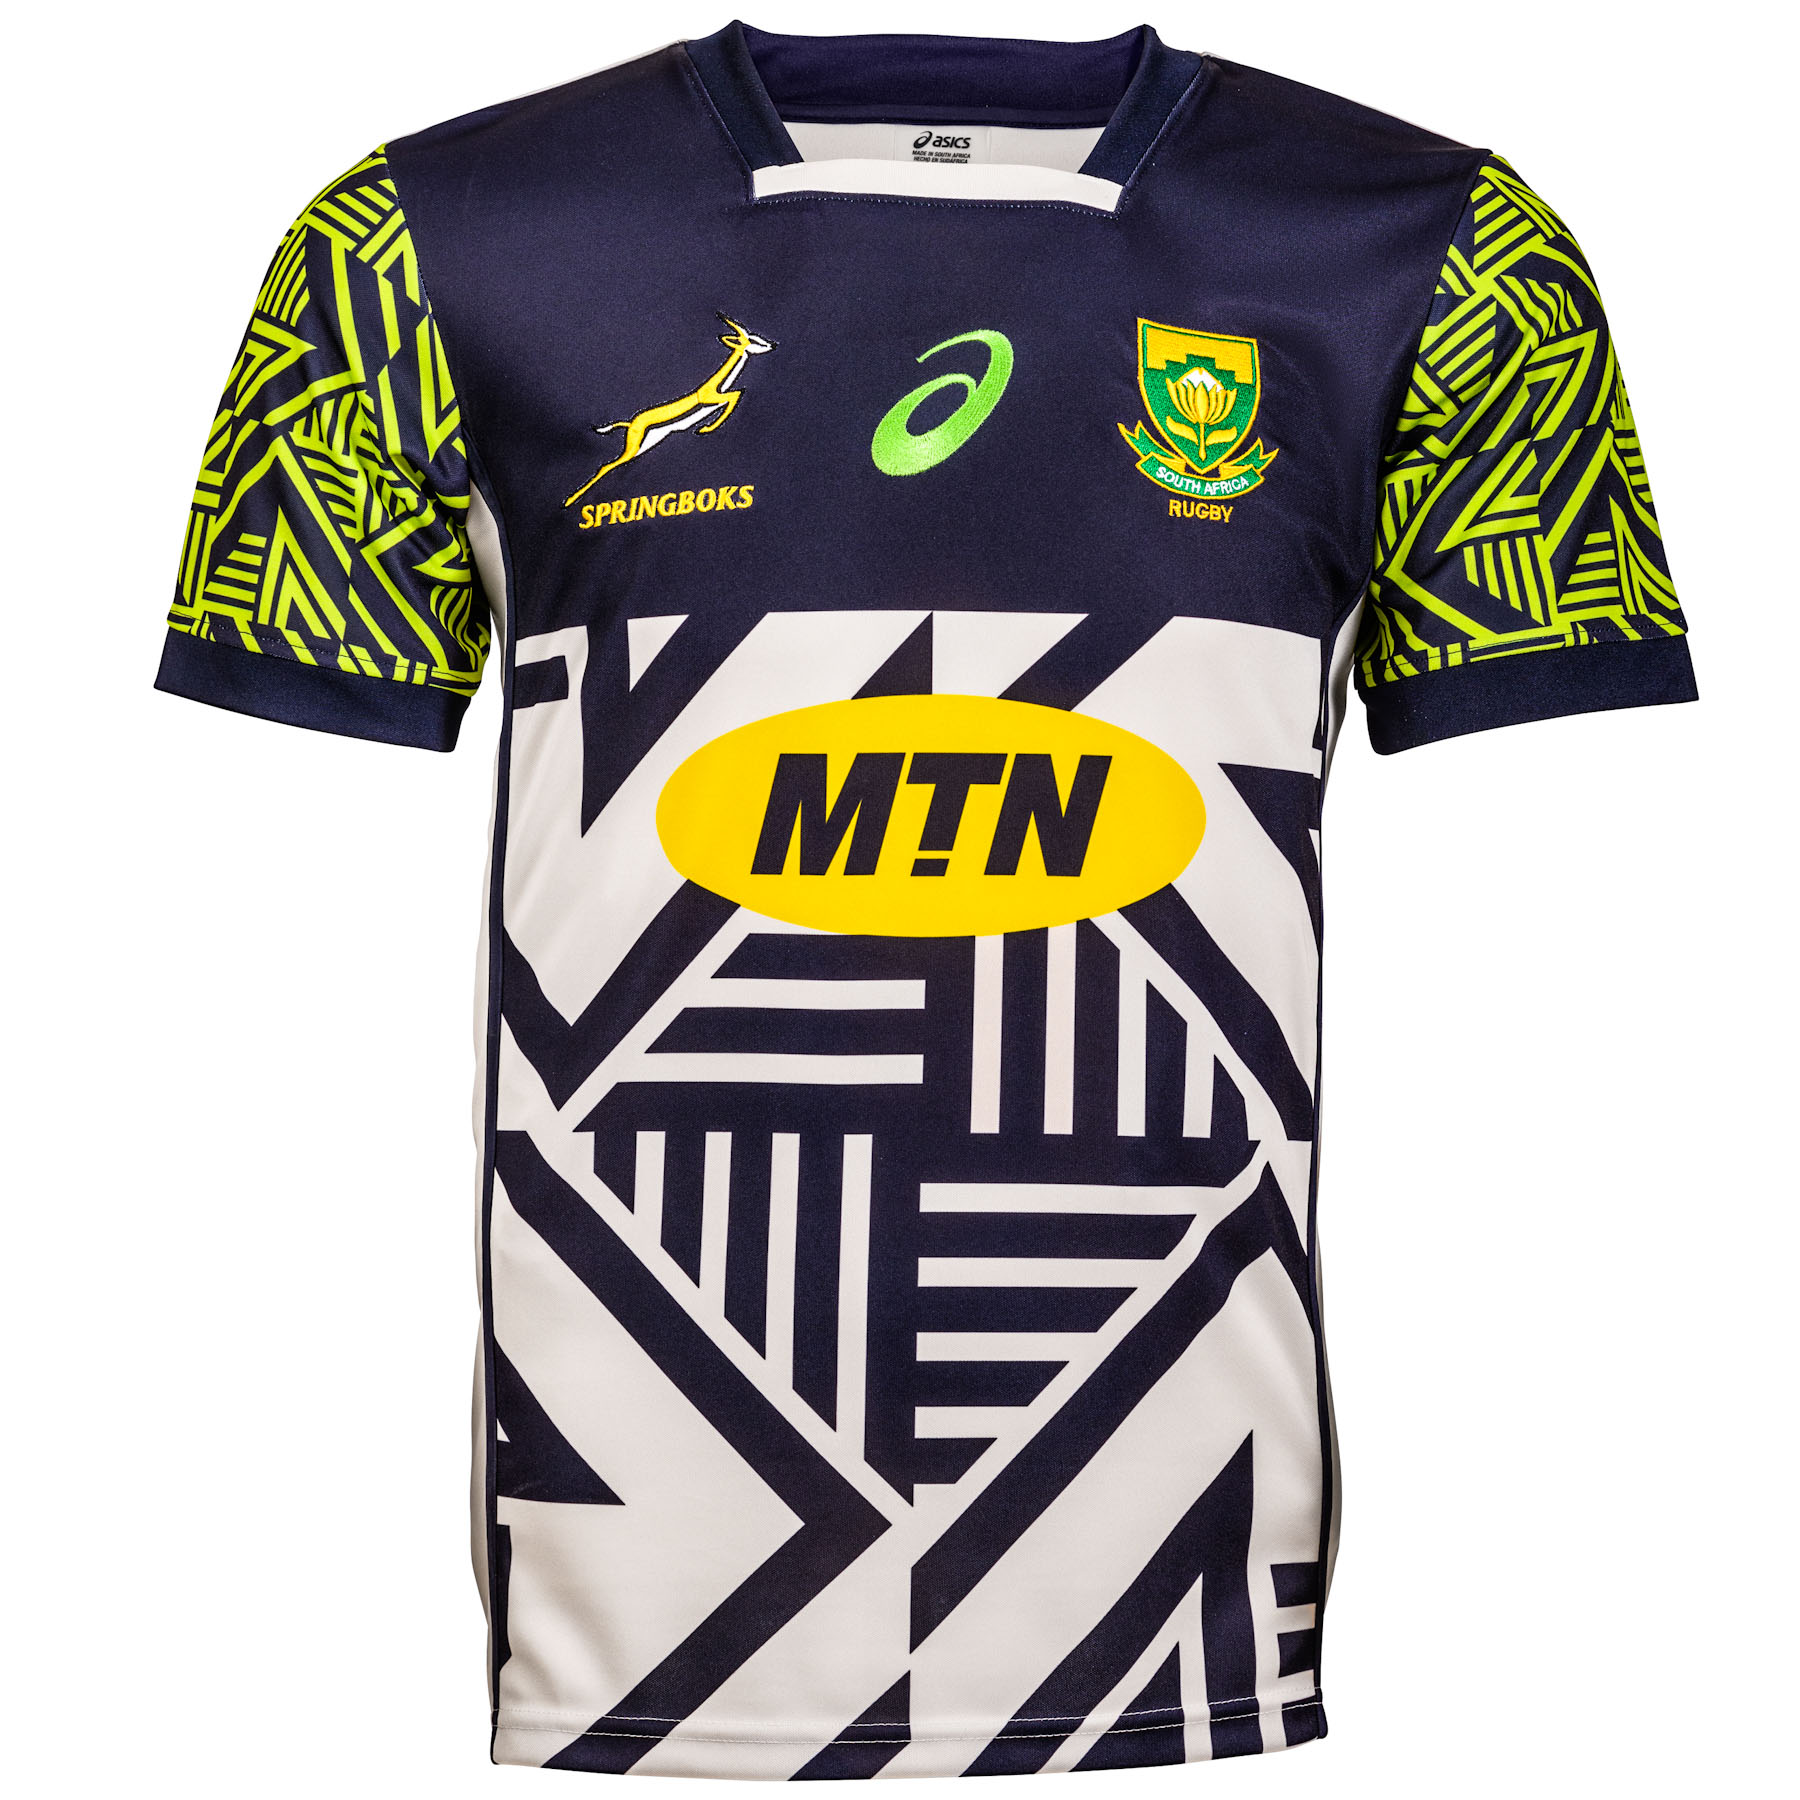 21st Century twist for “collab” Springbok jersey SA Rugby